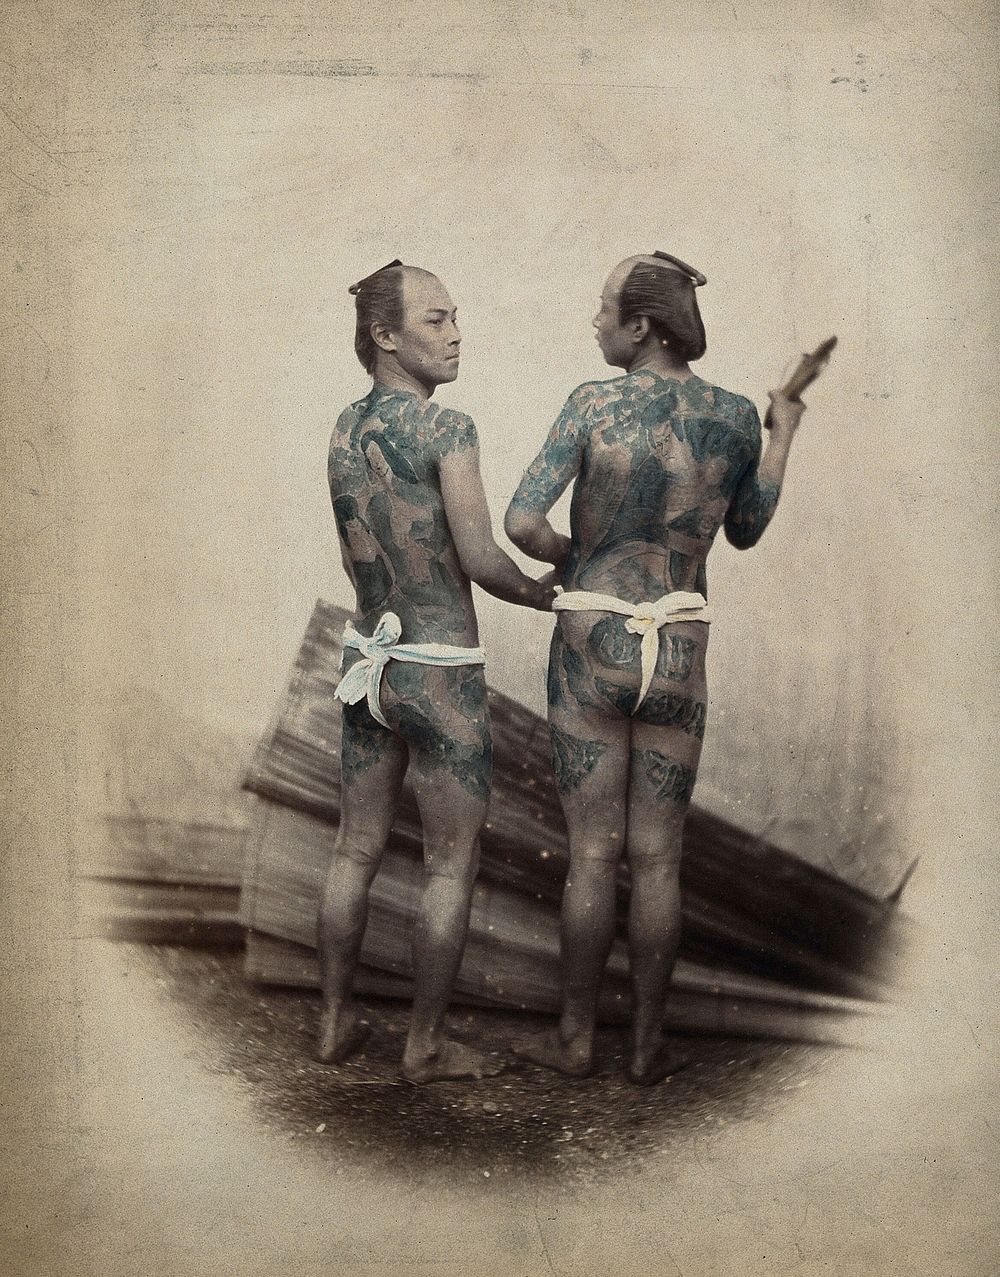 Japan: two men (bettoes or grooms) with elaborate tattoos. Coloured photograph.